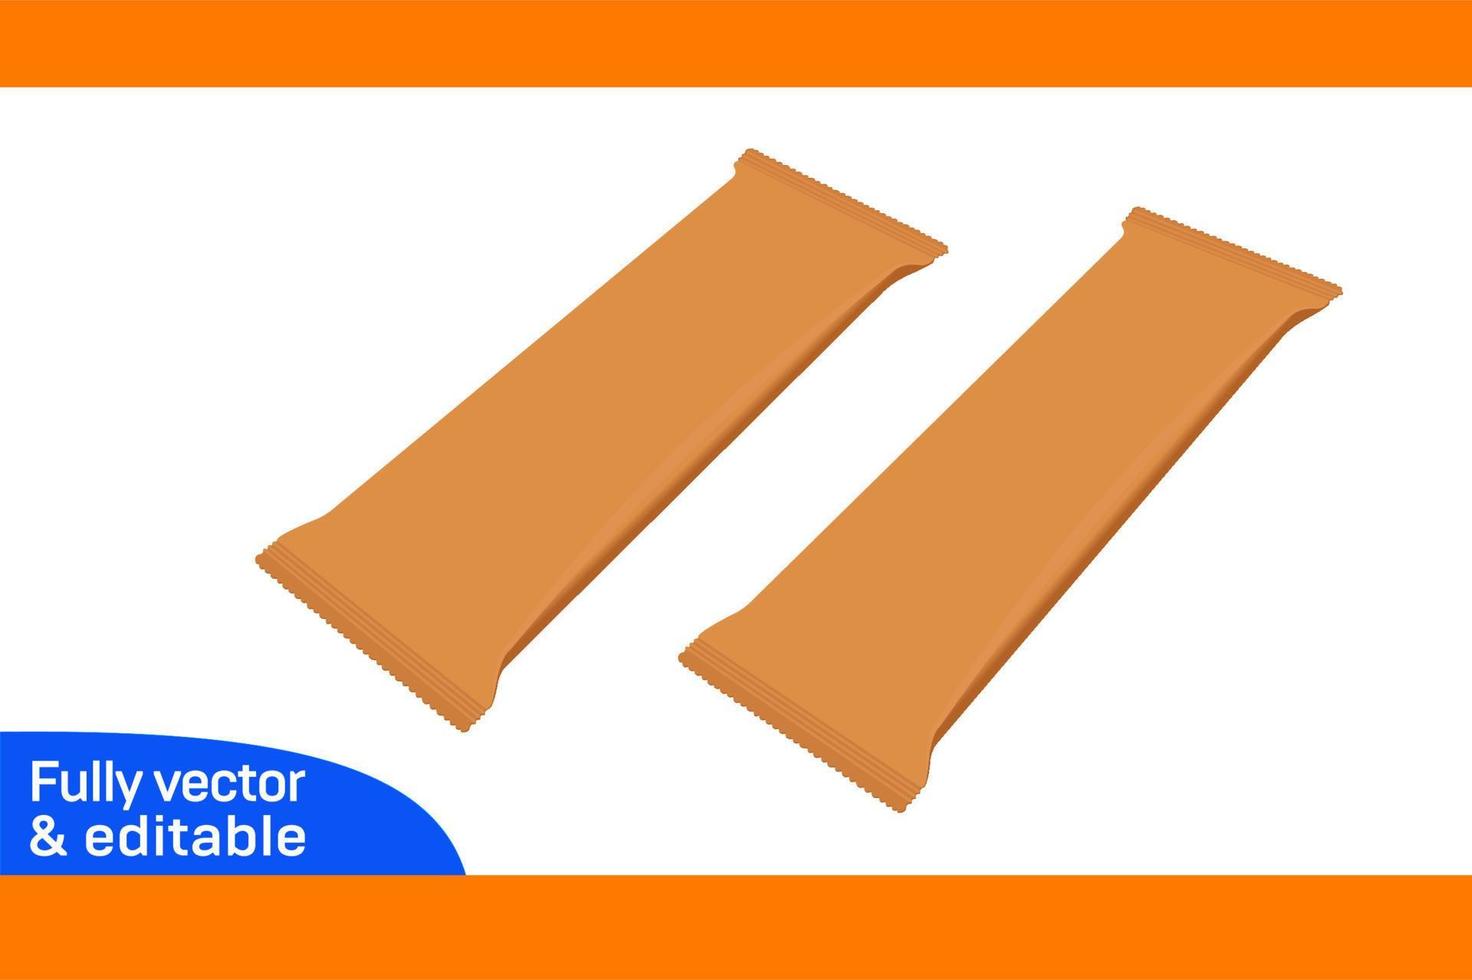 dieline template of plastic flat pouch for chocolate bar 3D box vector